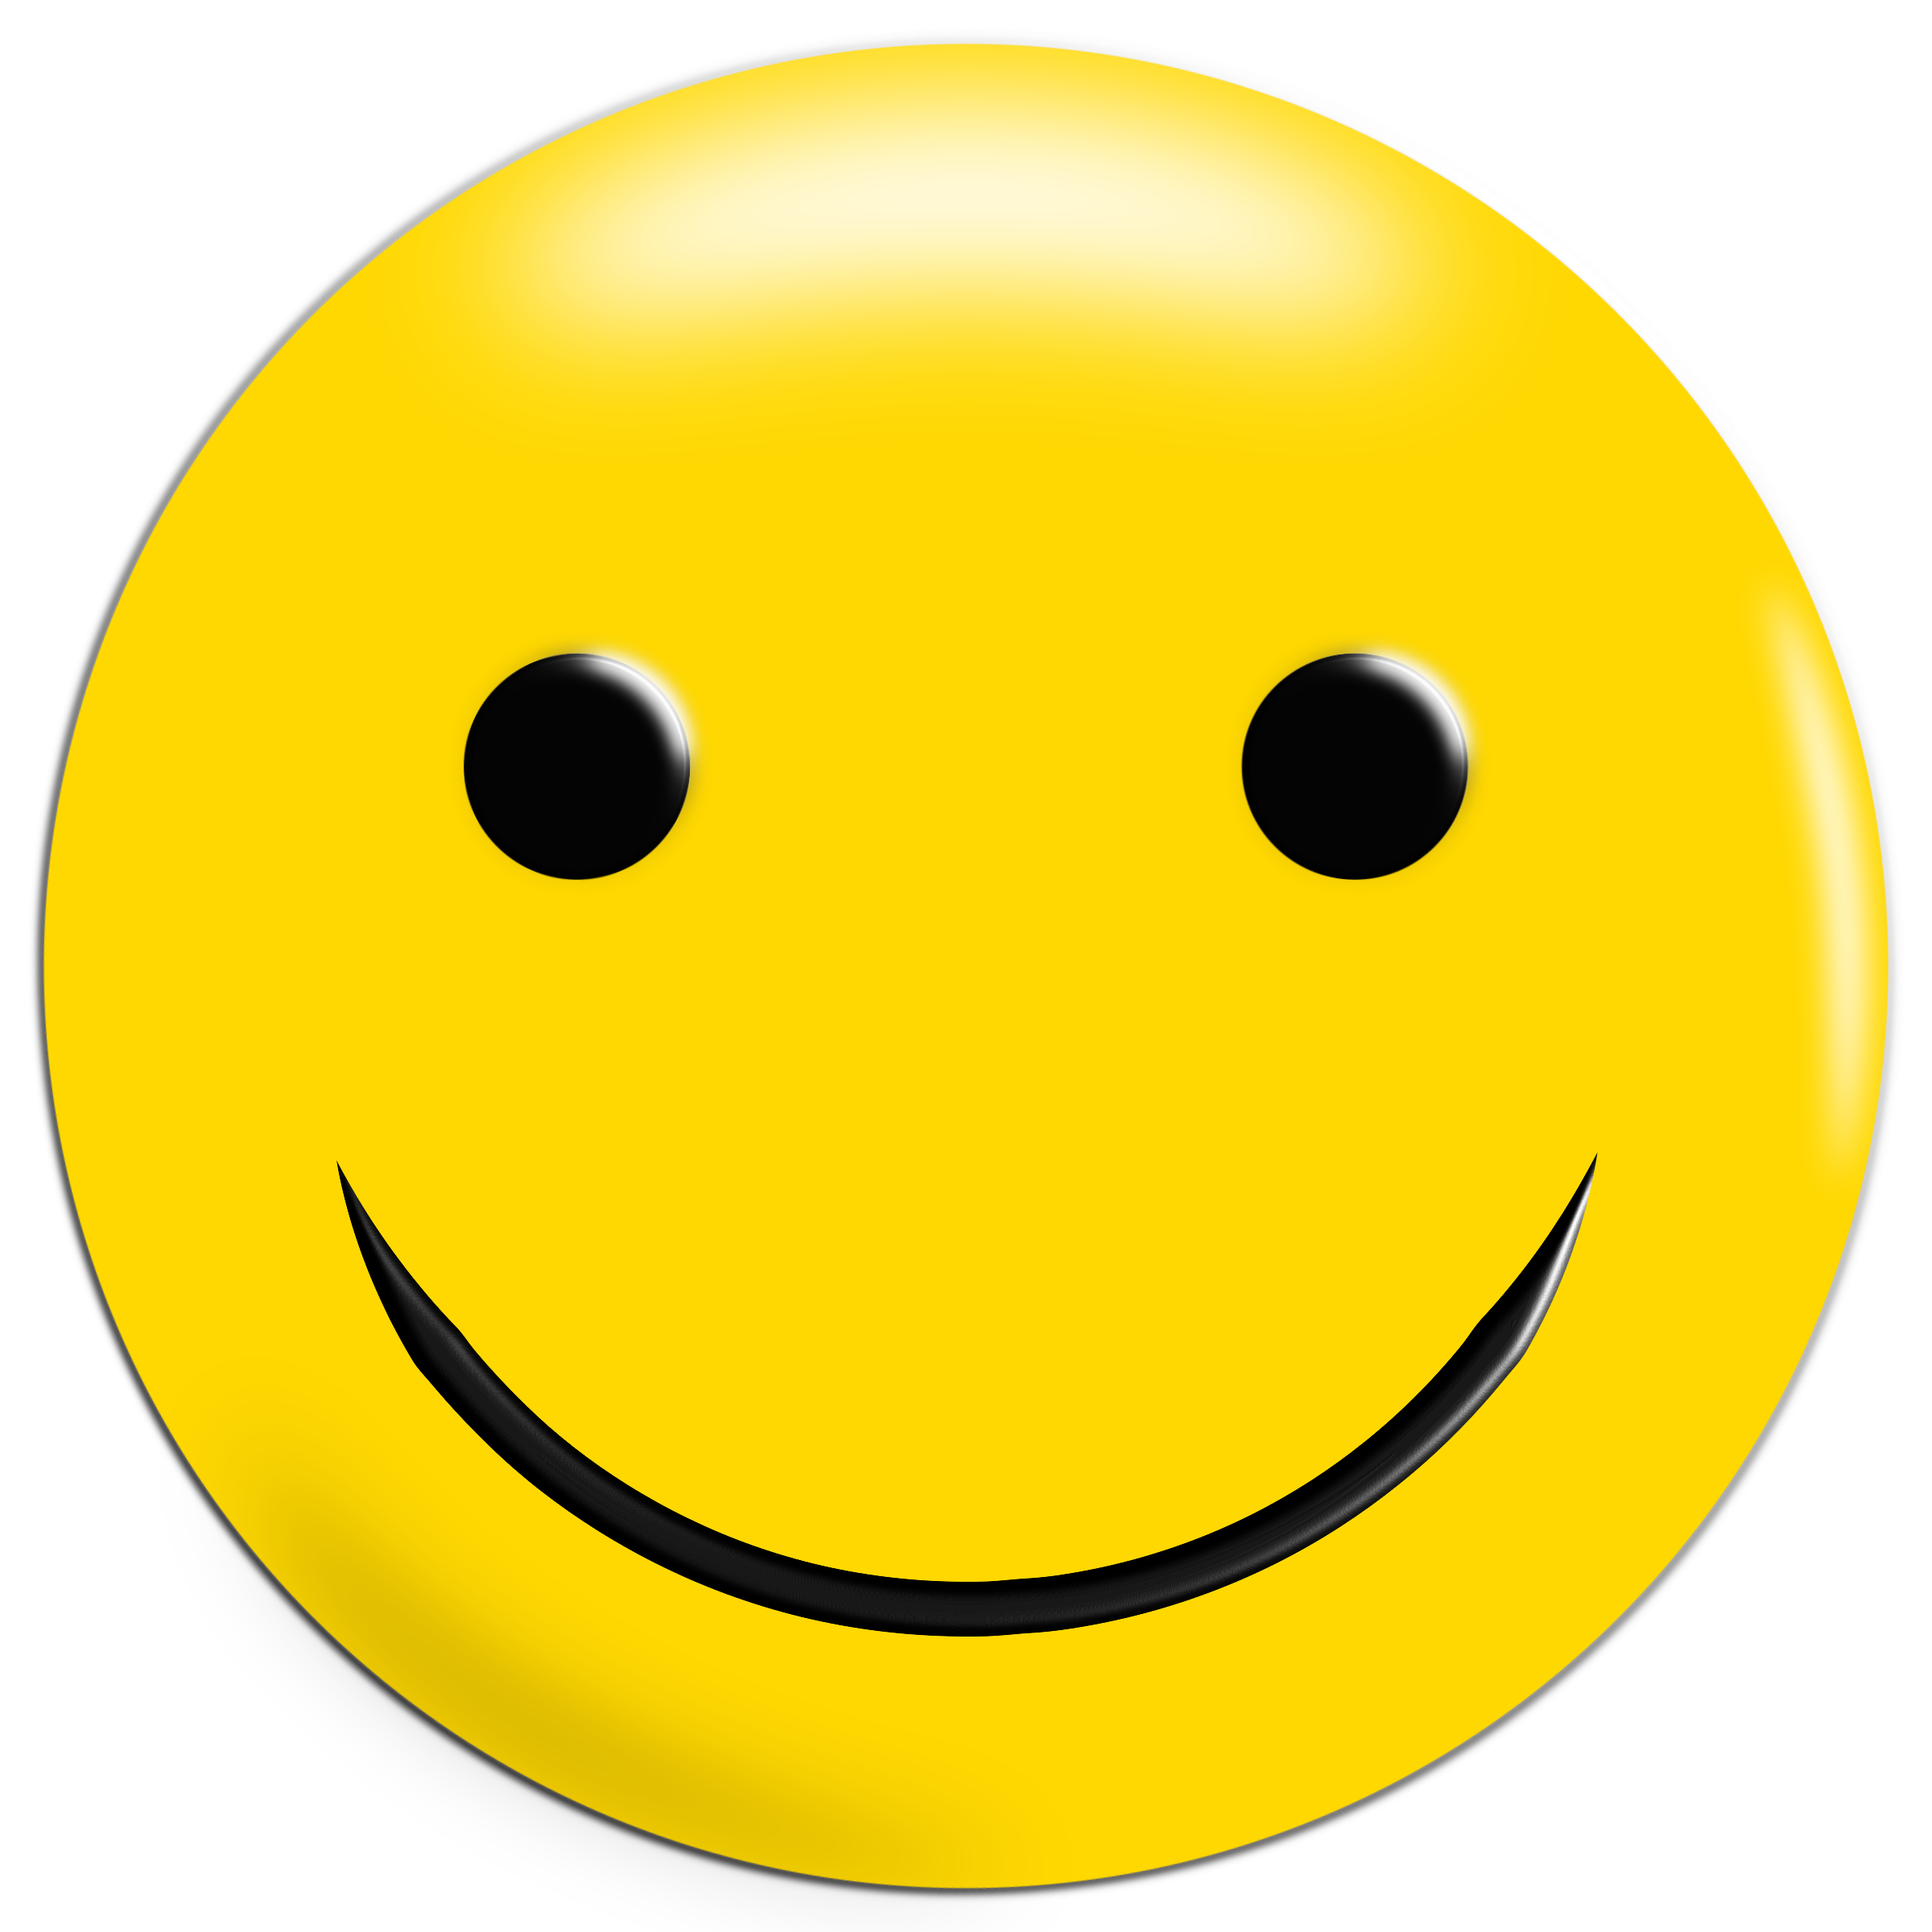 Emoticon Smiley Sunglasses Emoji Face Free Download PNG HD Clipart